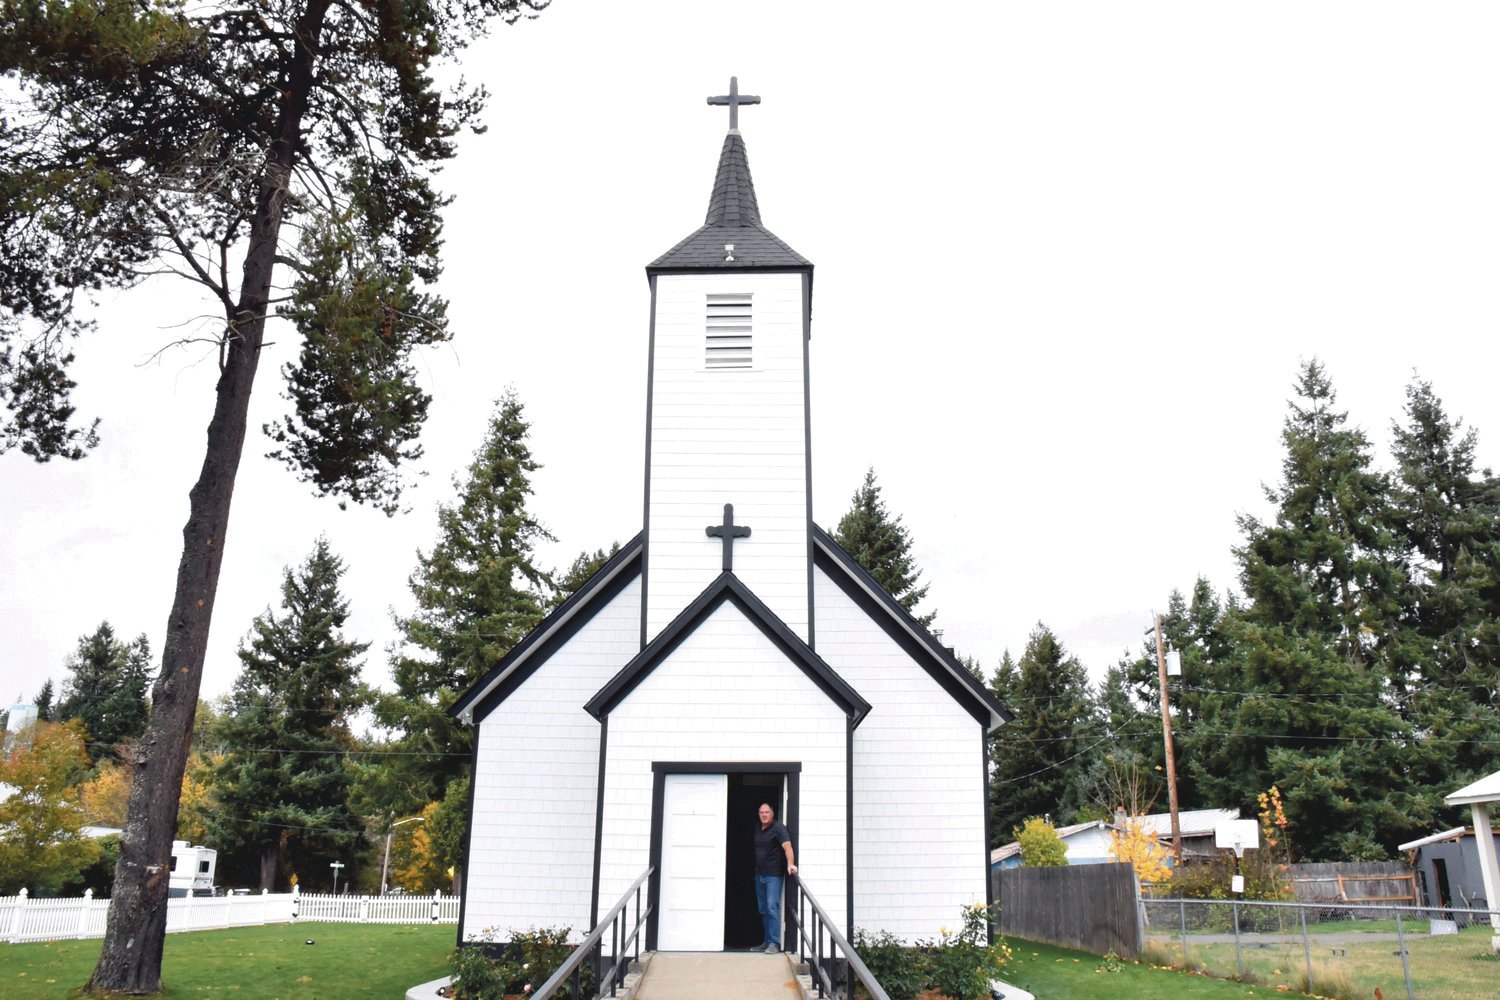 The Rainier Historical Zion Church, located at 209 Olympia St., received its long-sought-after exterior lighting in October 2021, along with indoor surveillance cameras. Rose gardens were planted during the summer of 2021..